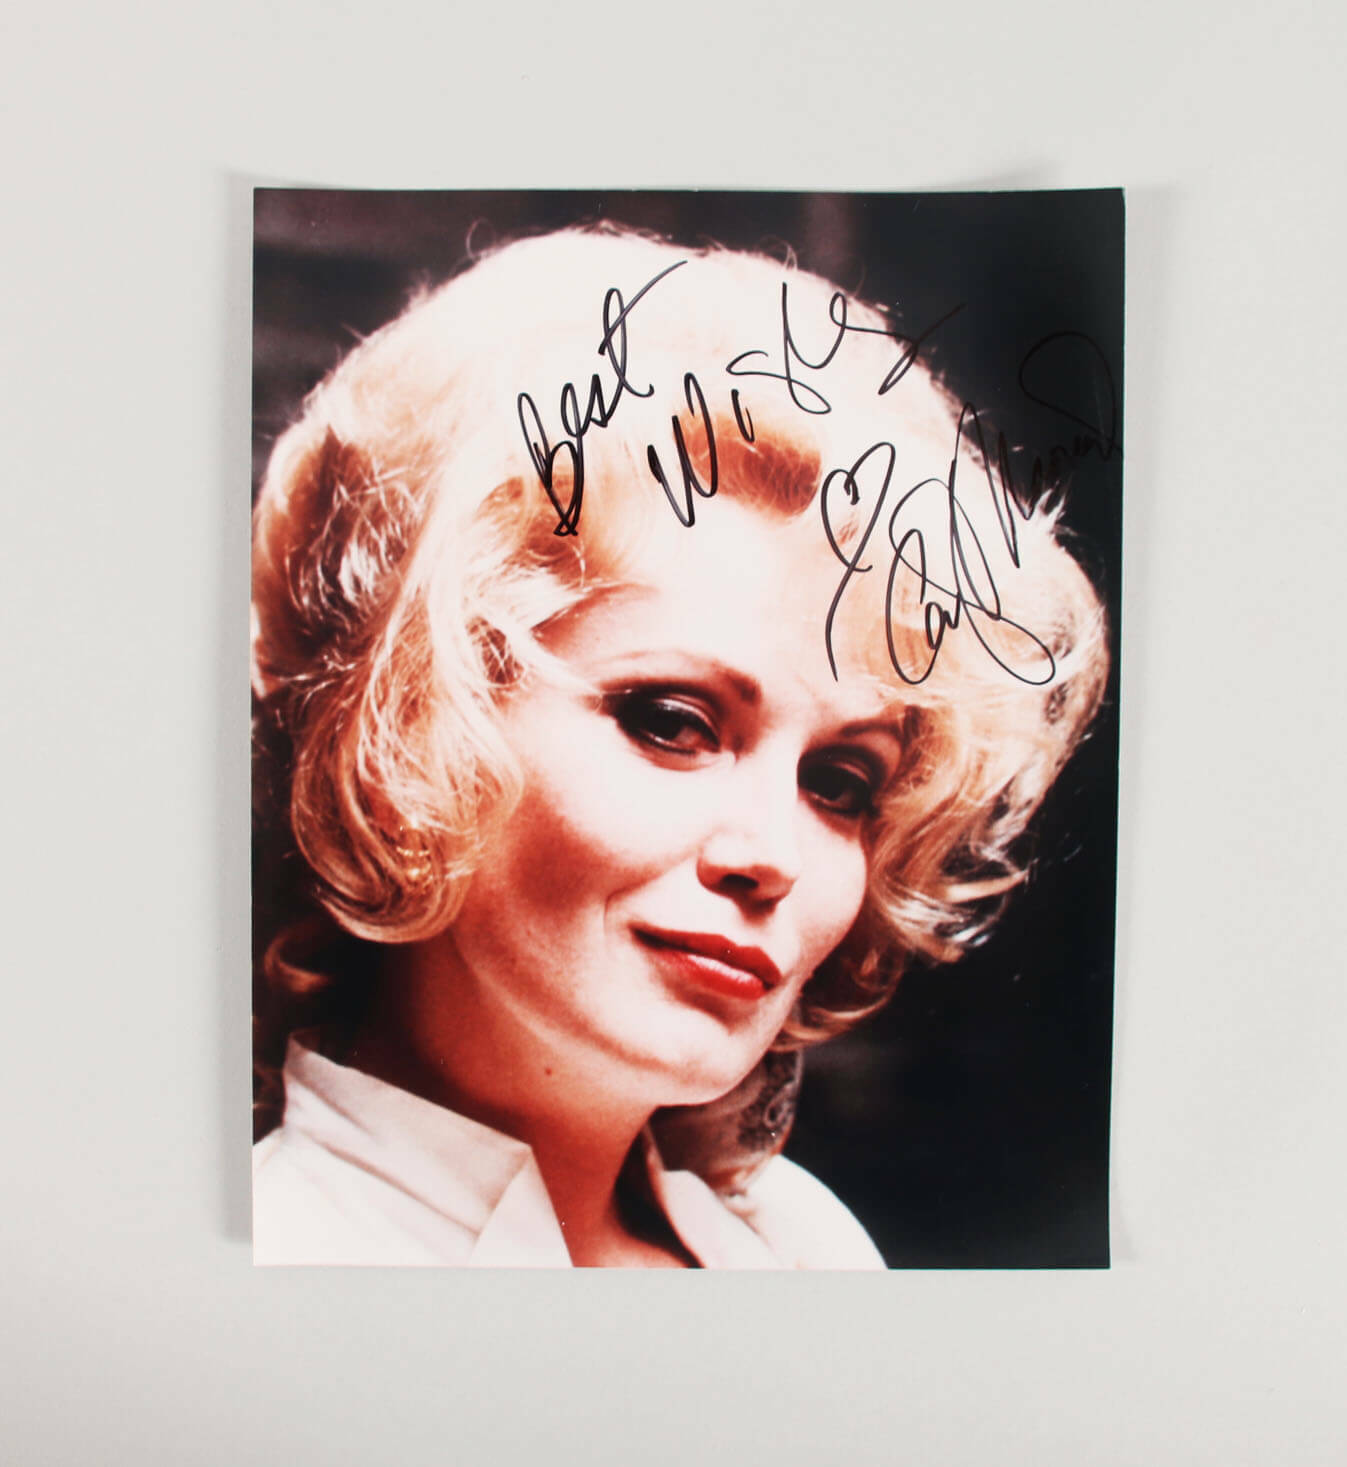 Cathy Moriarty Signed Photo Poster painting 8x10 - COA JSA